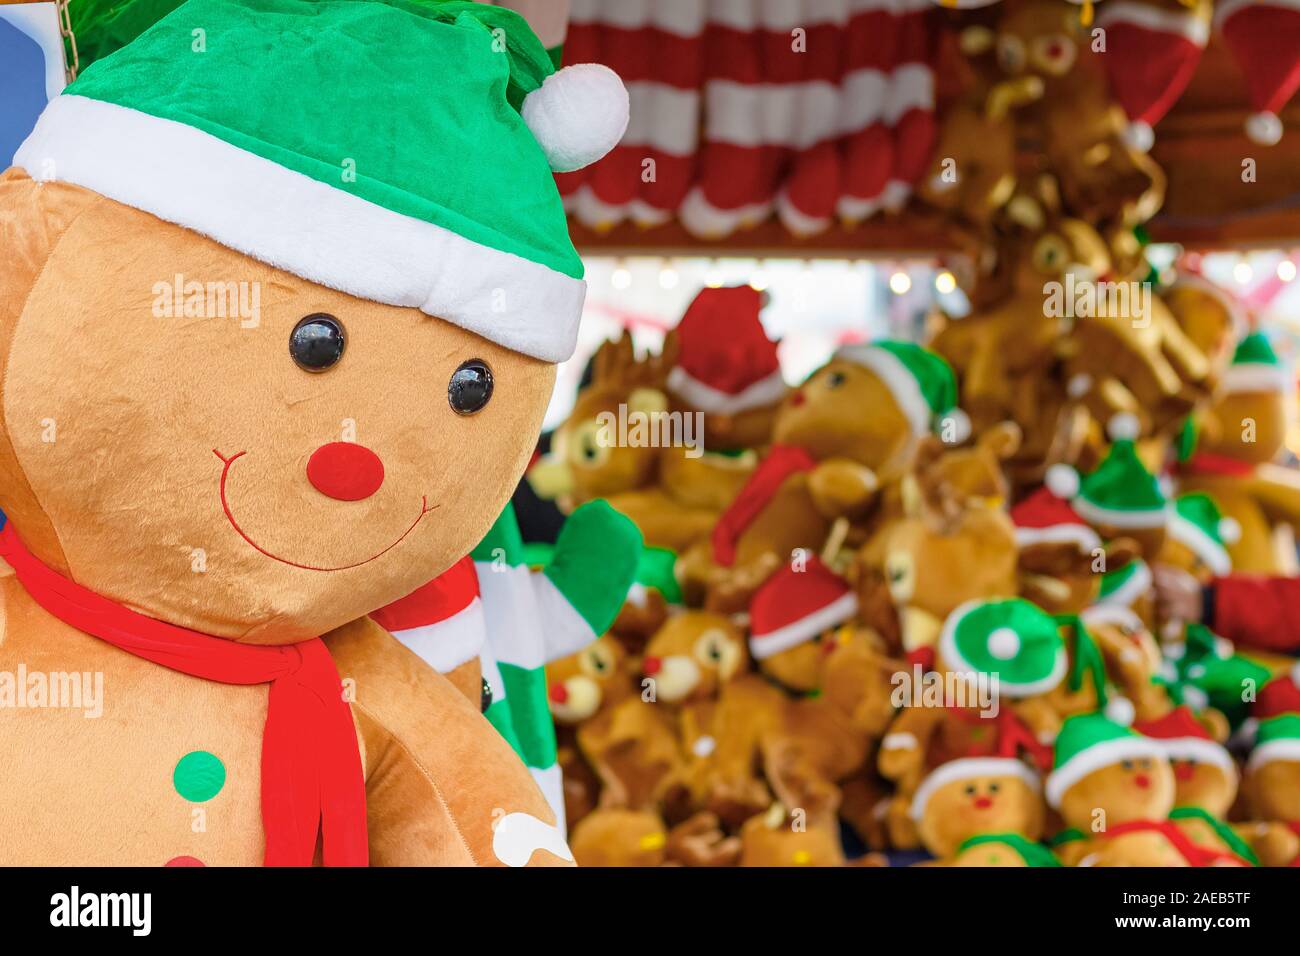 Stuffed toy gingerbread man on display awarded as winning prizes at the Christmas funfair, Winter Wonderland in London Stock Photo